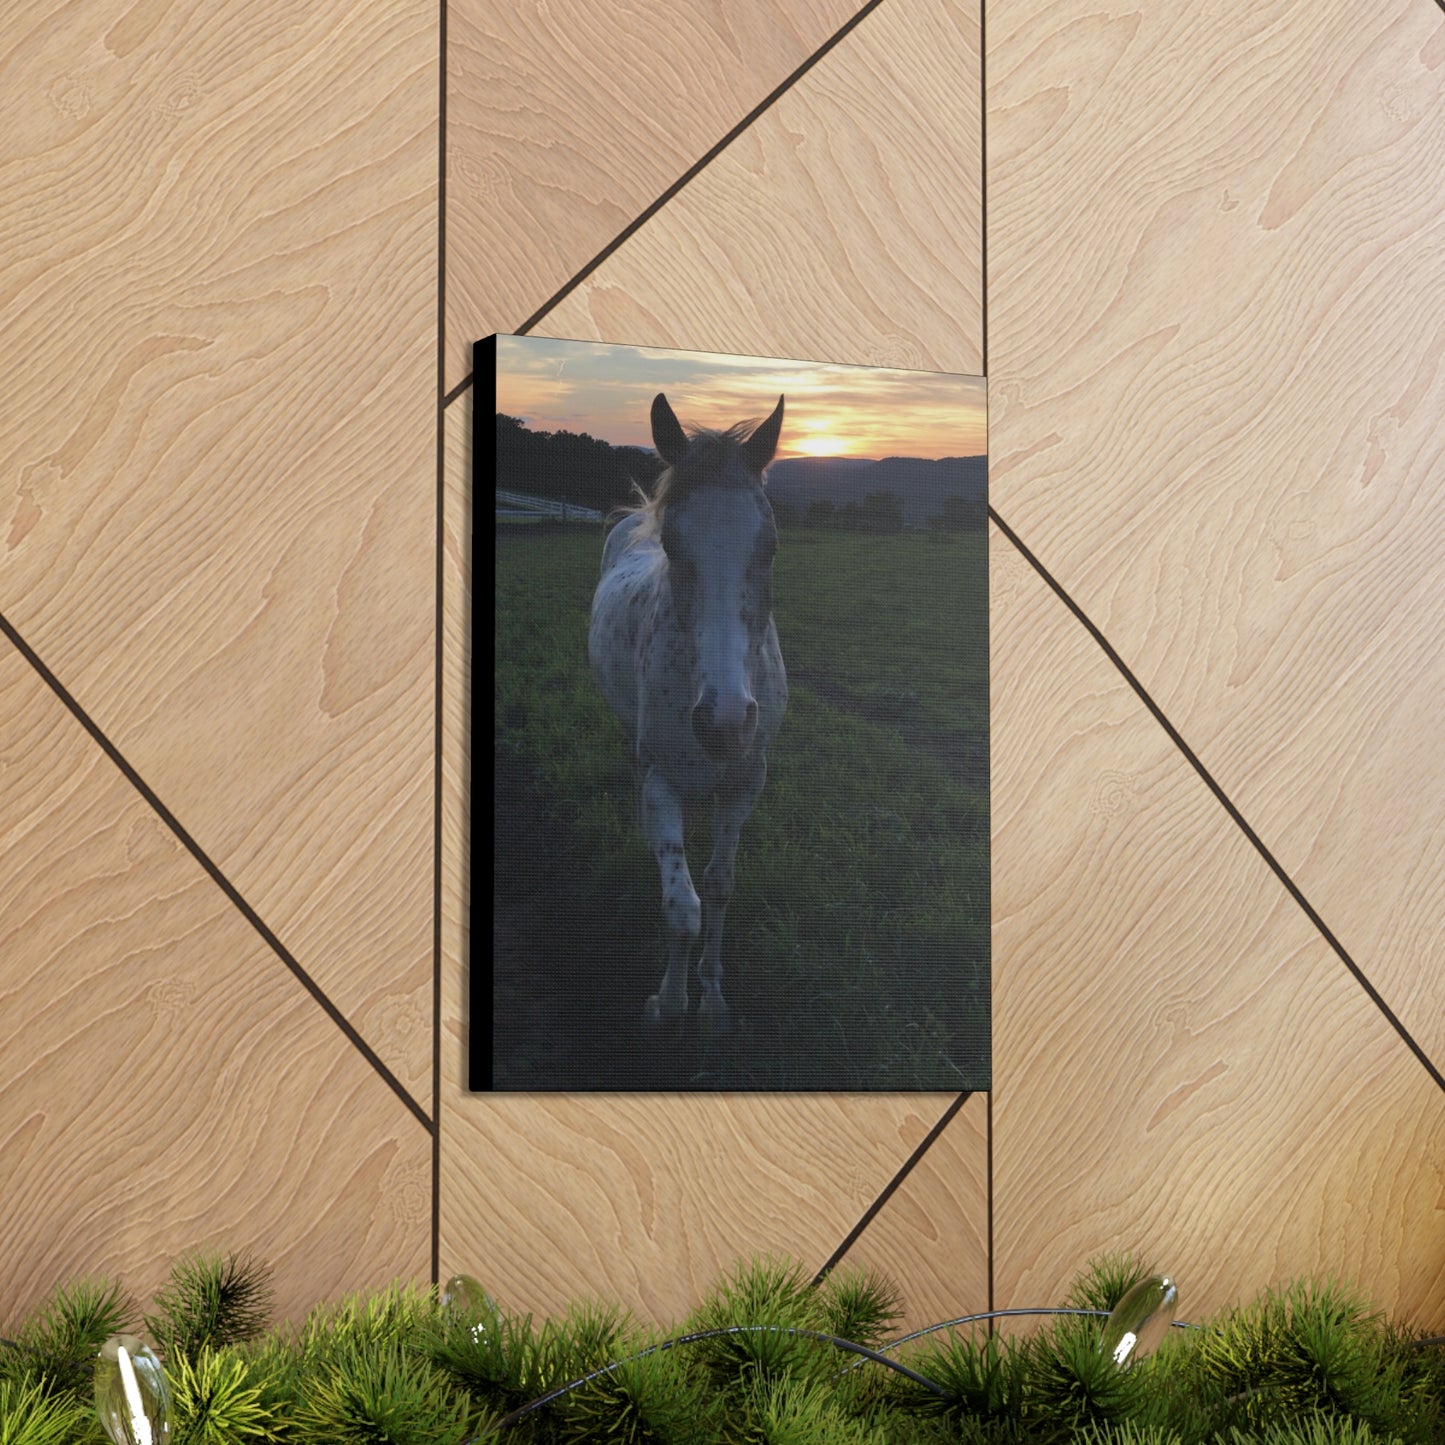 Canvas Gallery Wrap - Cochise - Photo